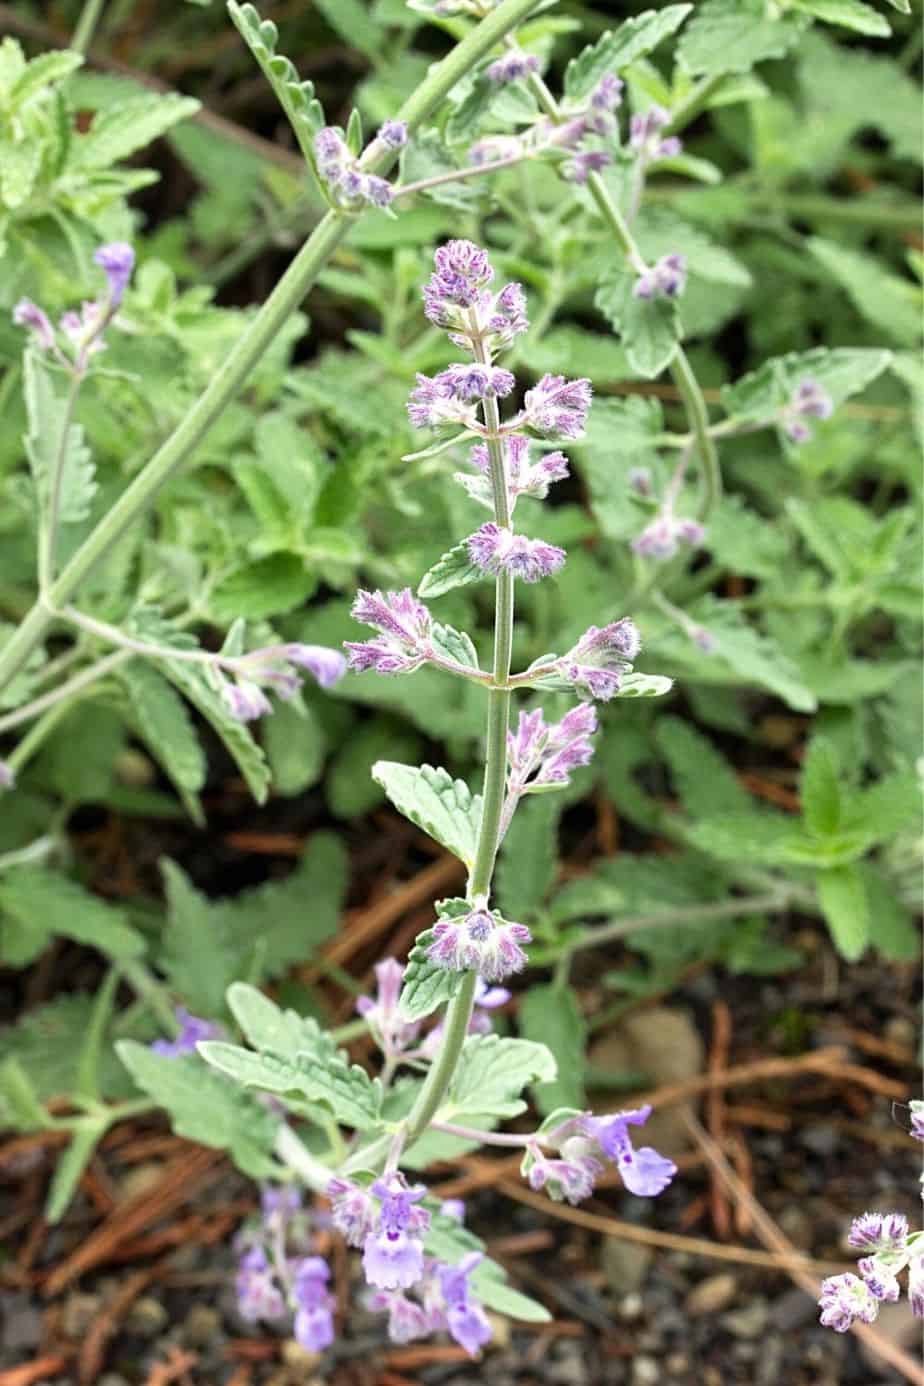 Catmint is an inedible variety of mint that will thrive in a west-facing side of the house garden